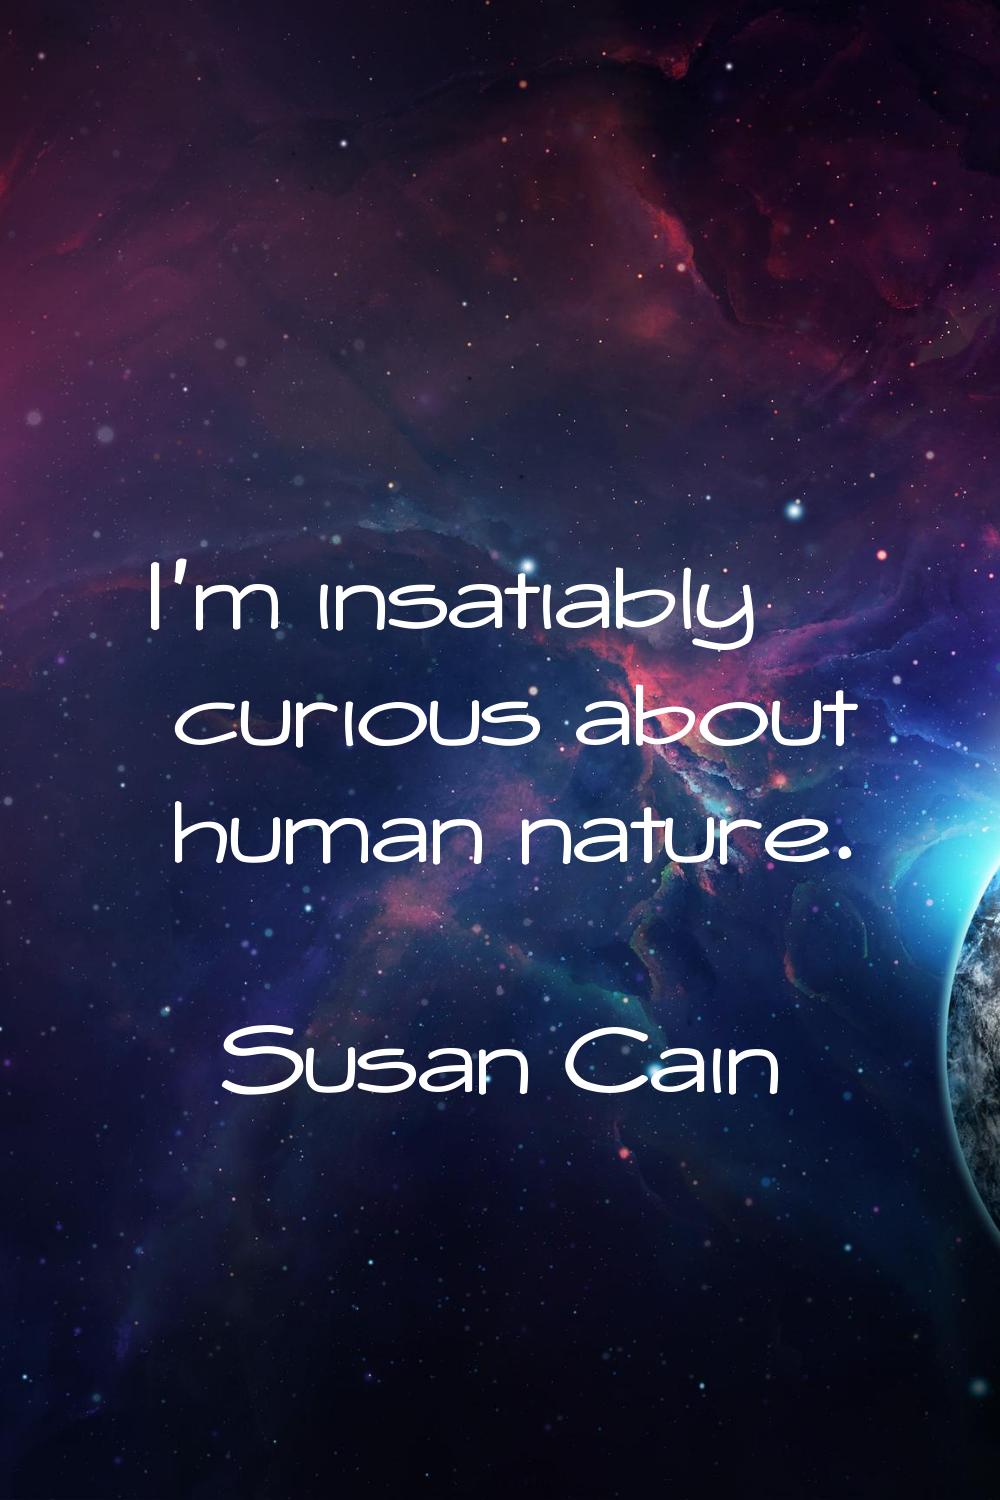 I'm insatiably curious about human nature.